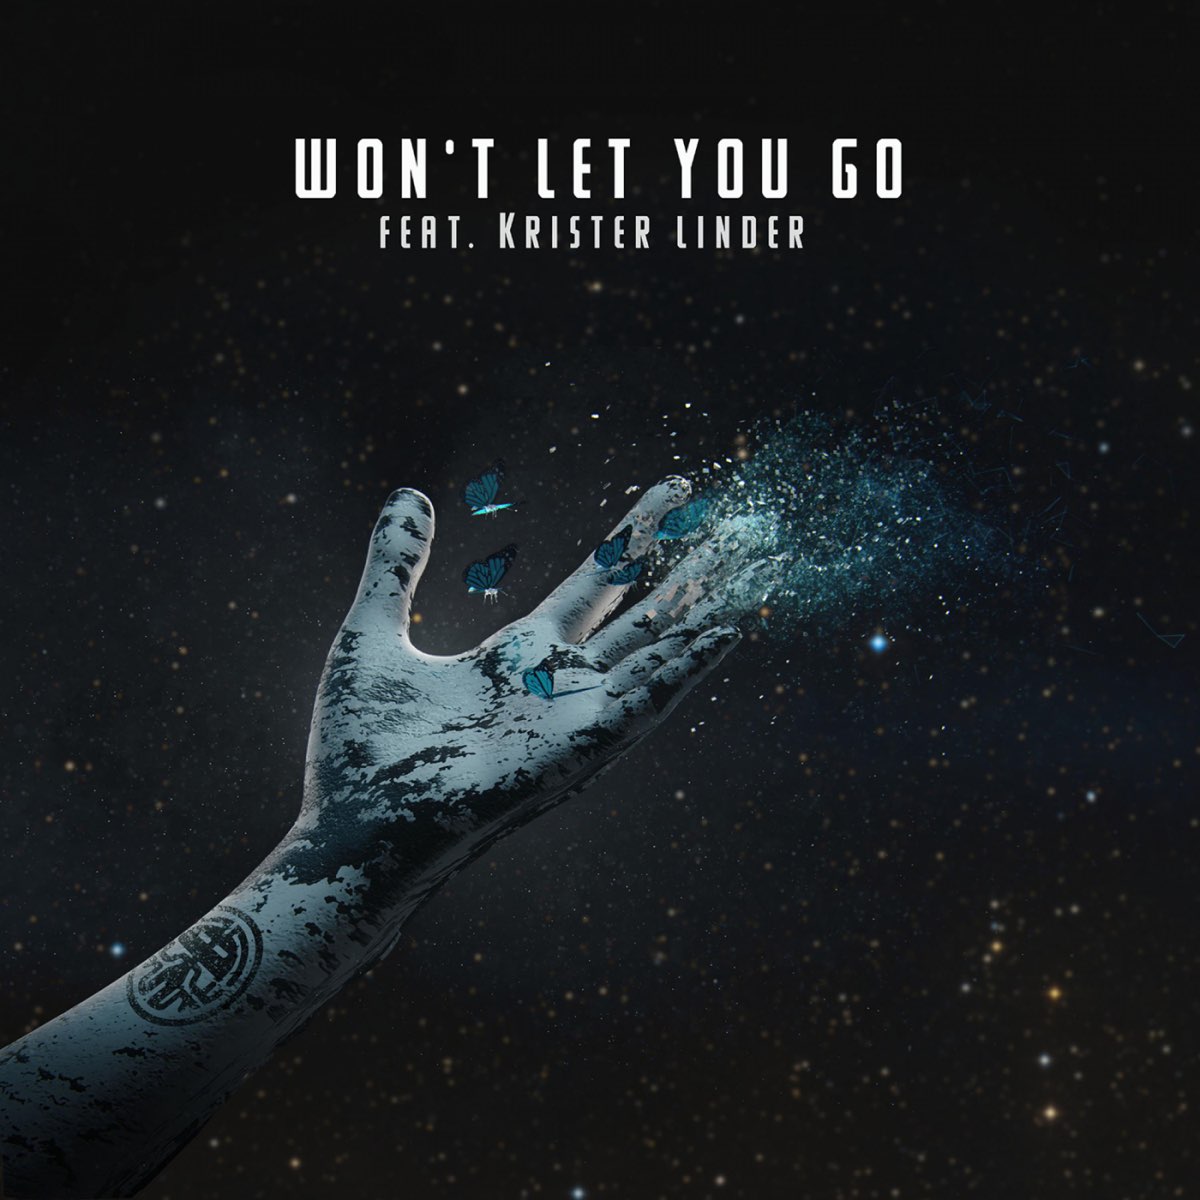 Песни i let you go. Let you go. You won't. Let you go картинки. Letting you go.